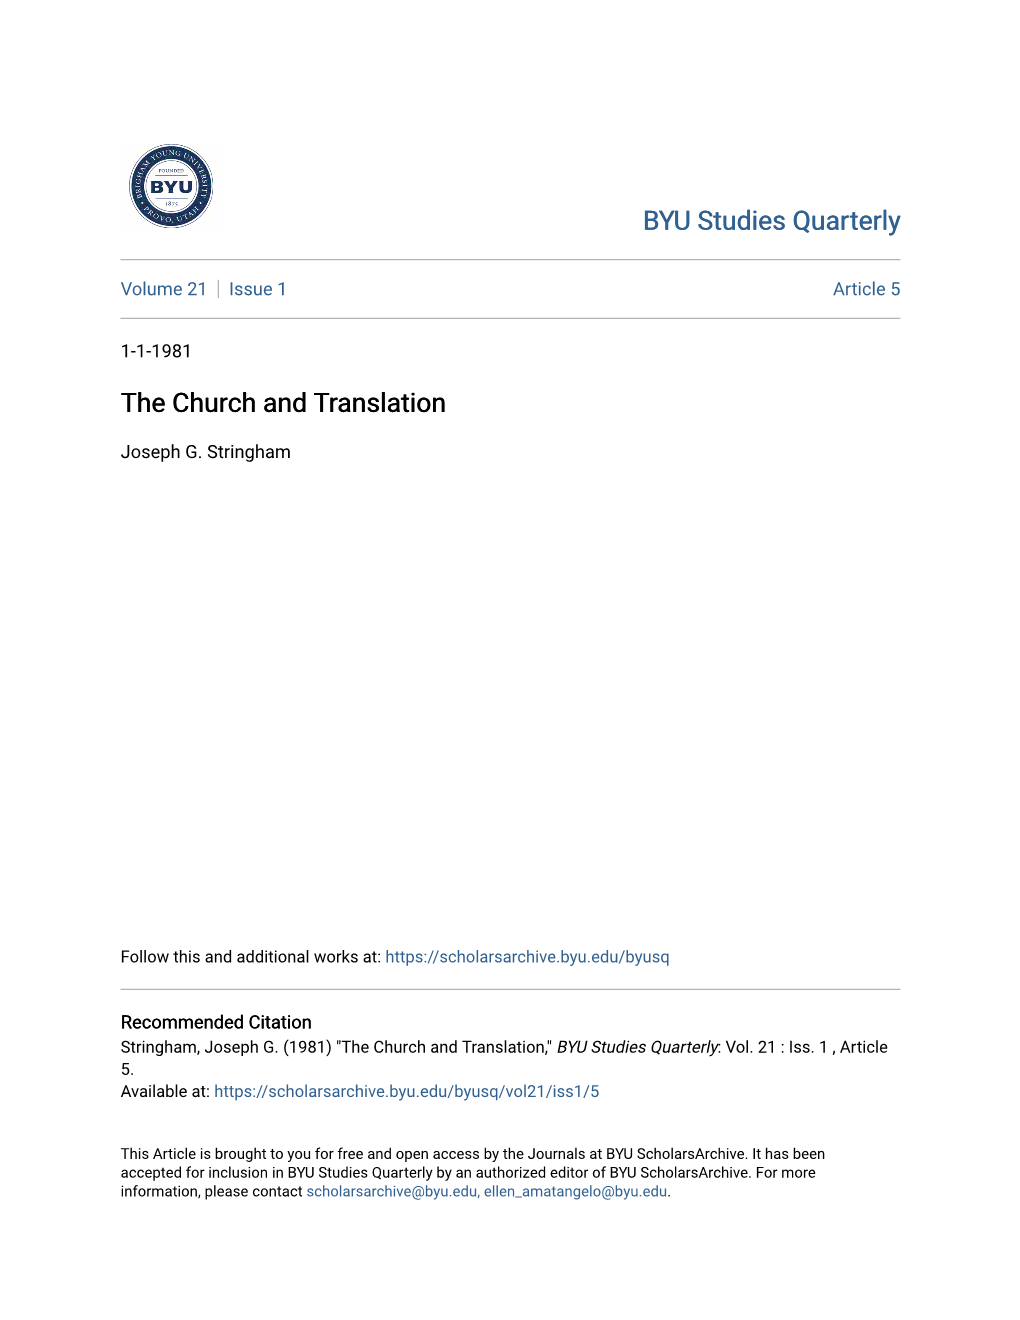 The Church and Translation